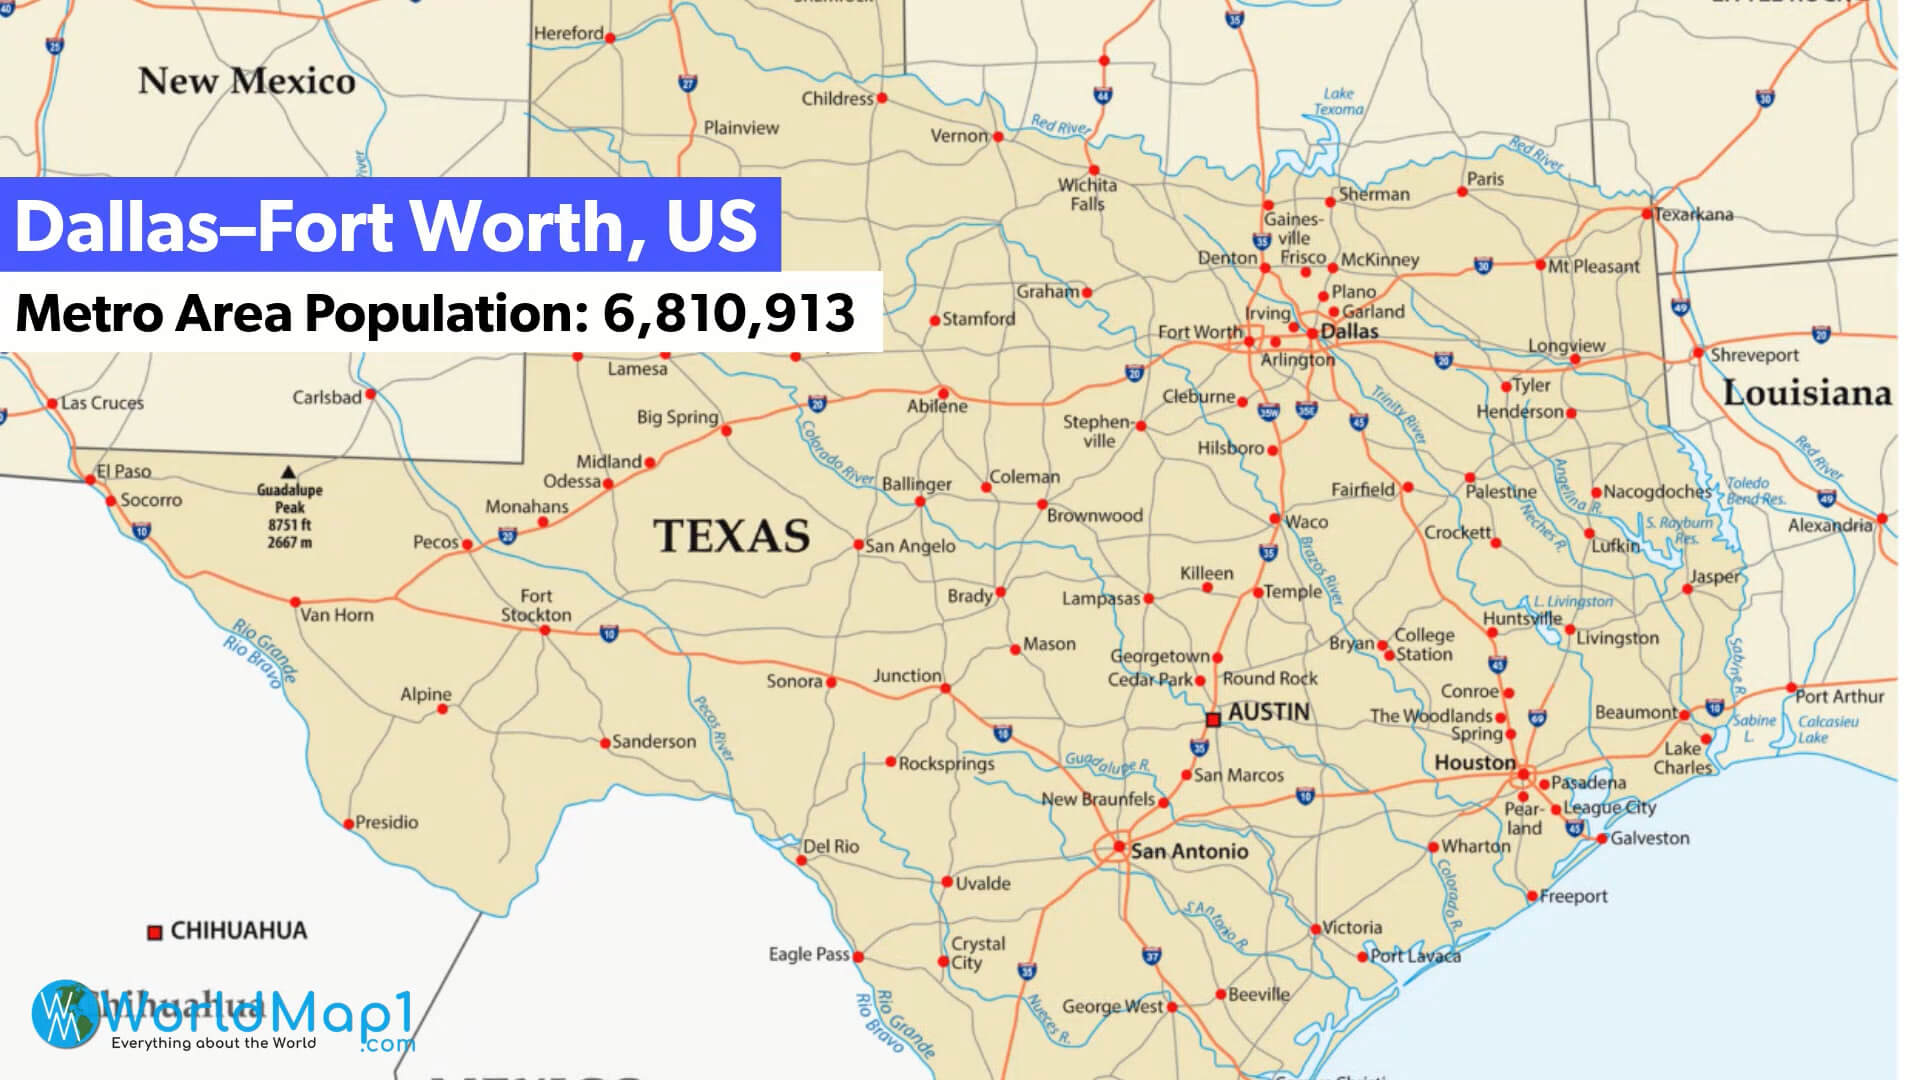 Dallas Forth Worth Map and Population